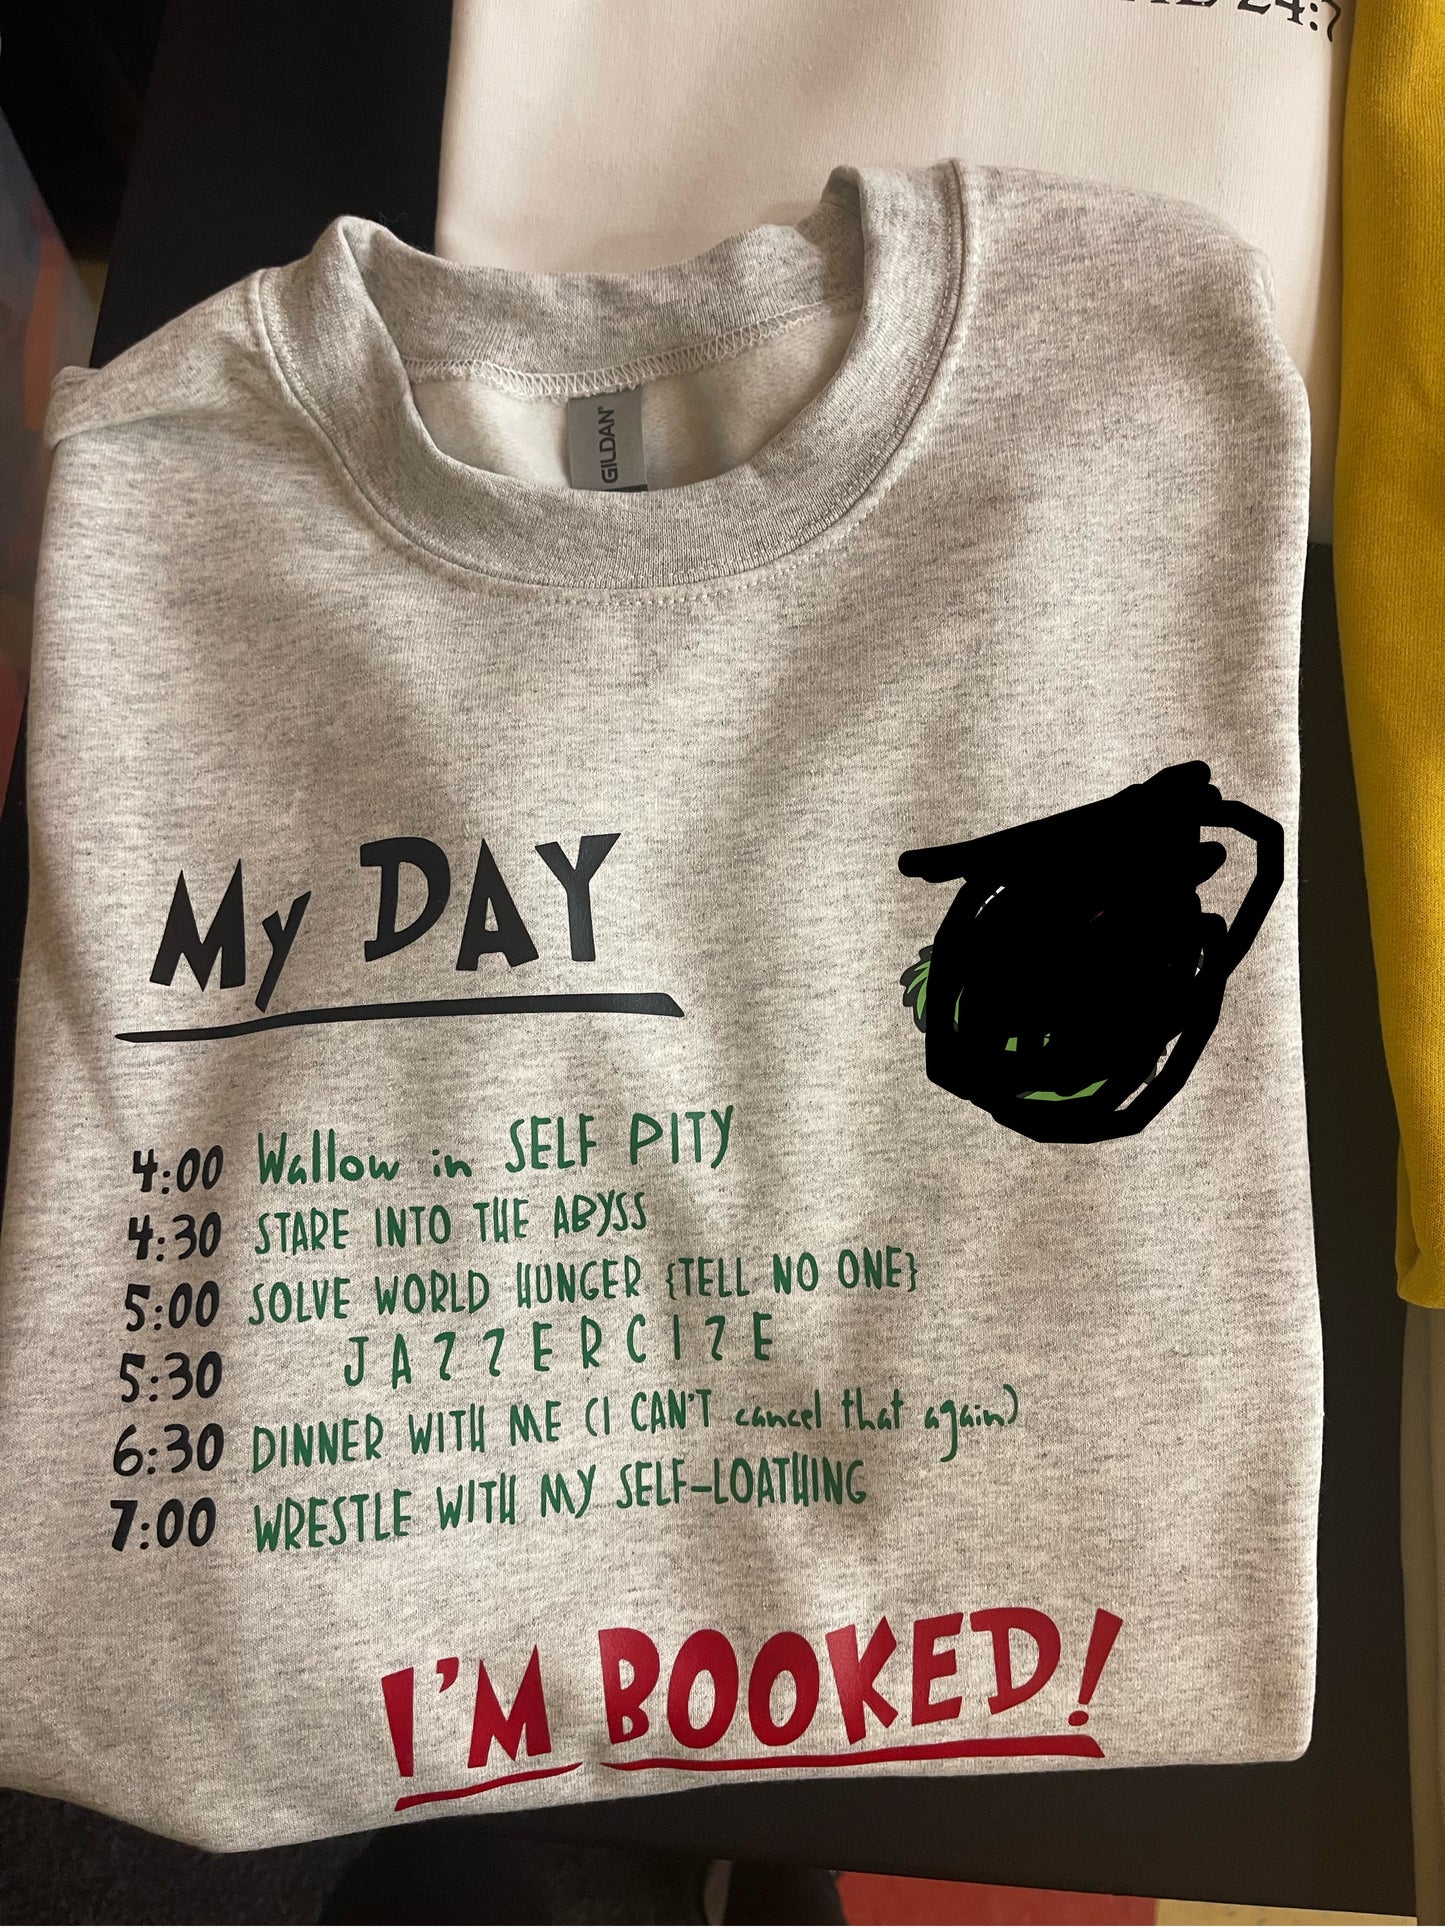 My day… I’m booked crewneck